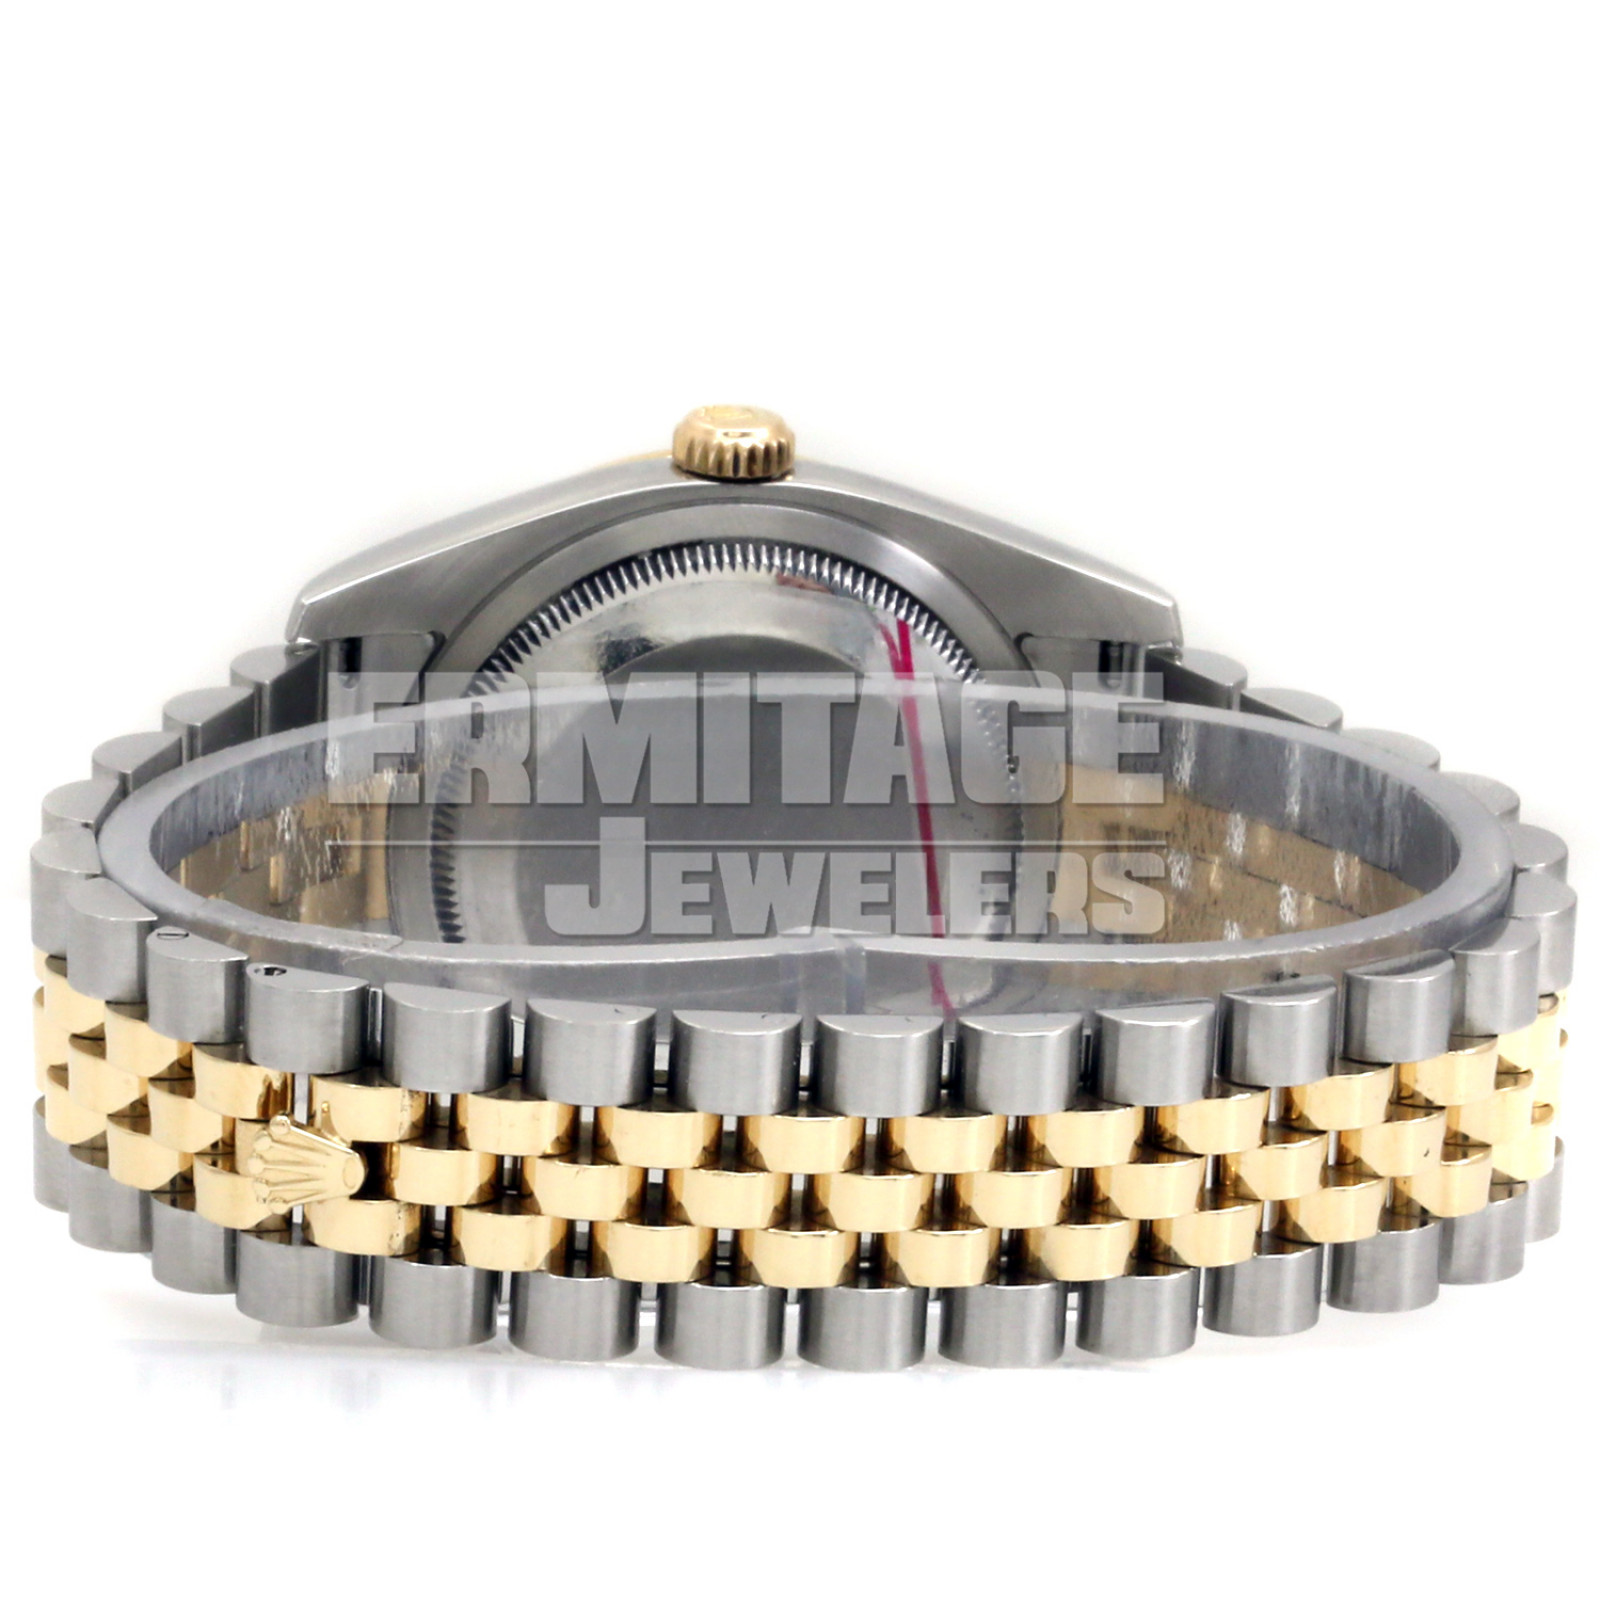 Pre-Owned Rolex Datejust Turn-O-Graph 116263